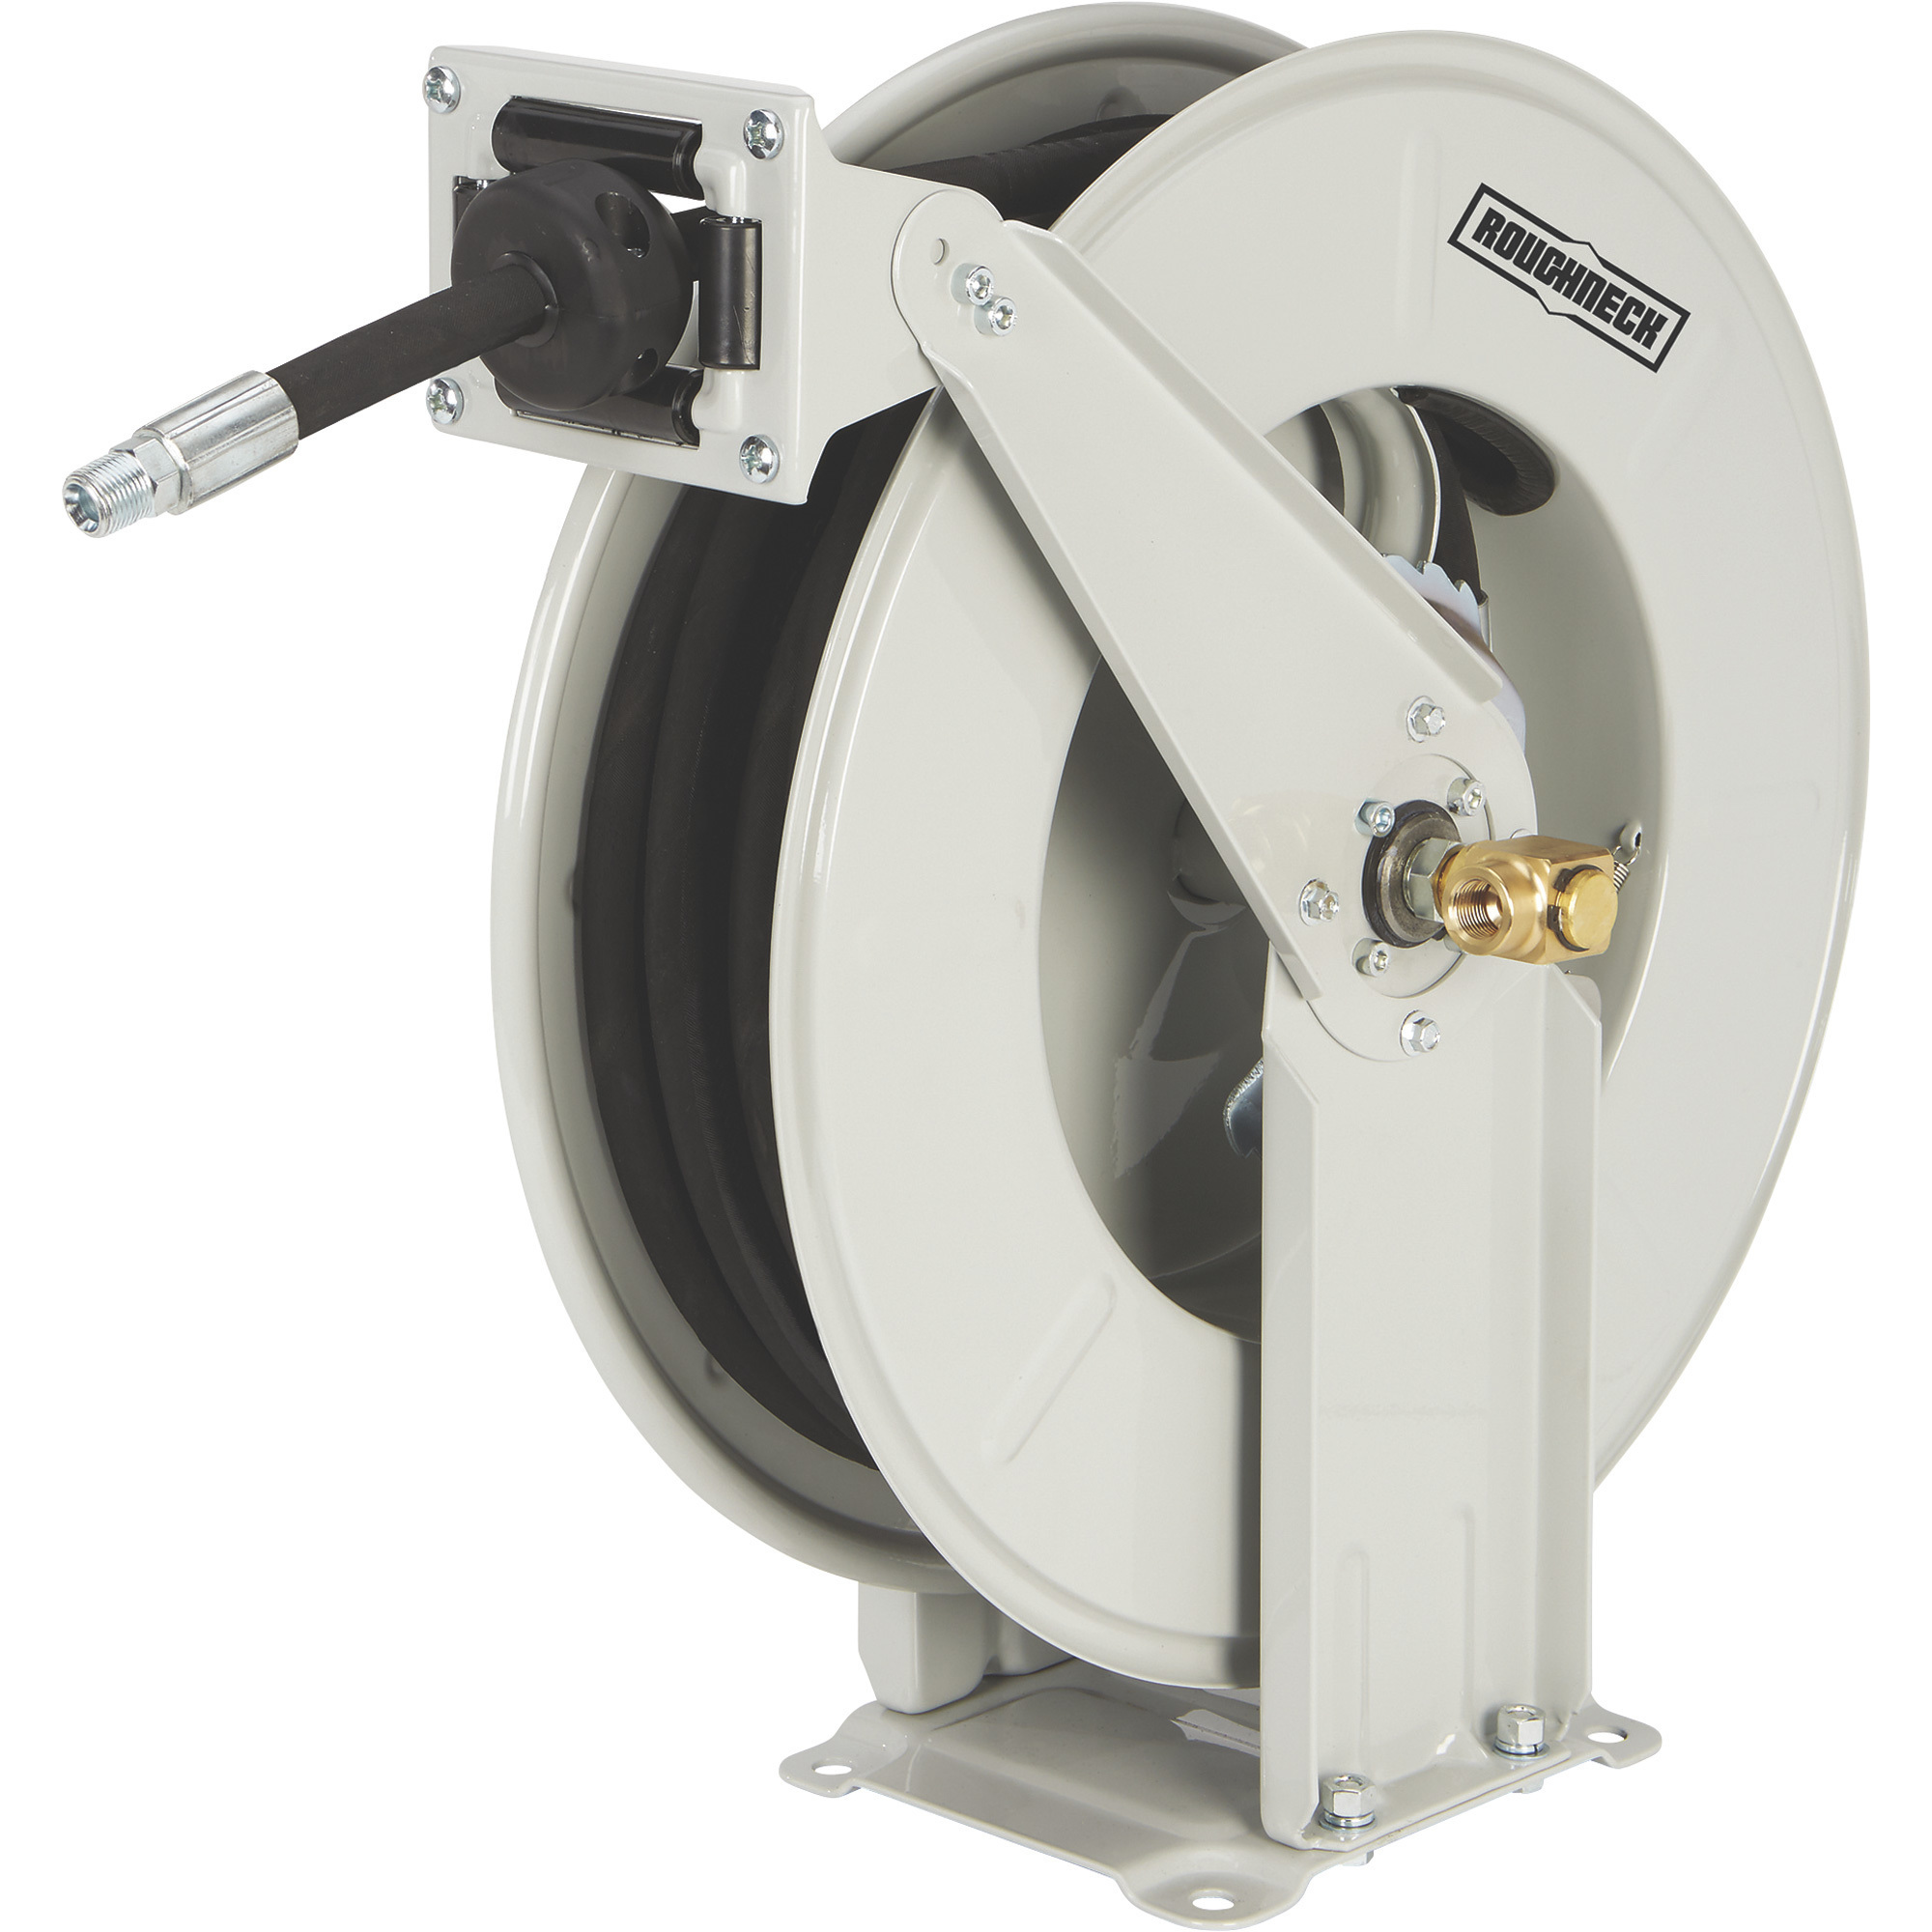 Roughneck Heavy-Duty Oil Hose Reel with 3/8in. x 50ft. Hose